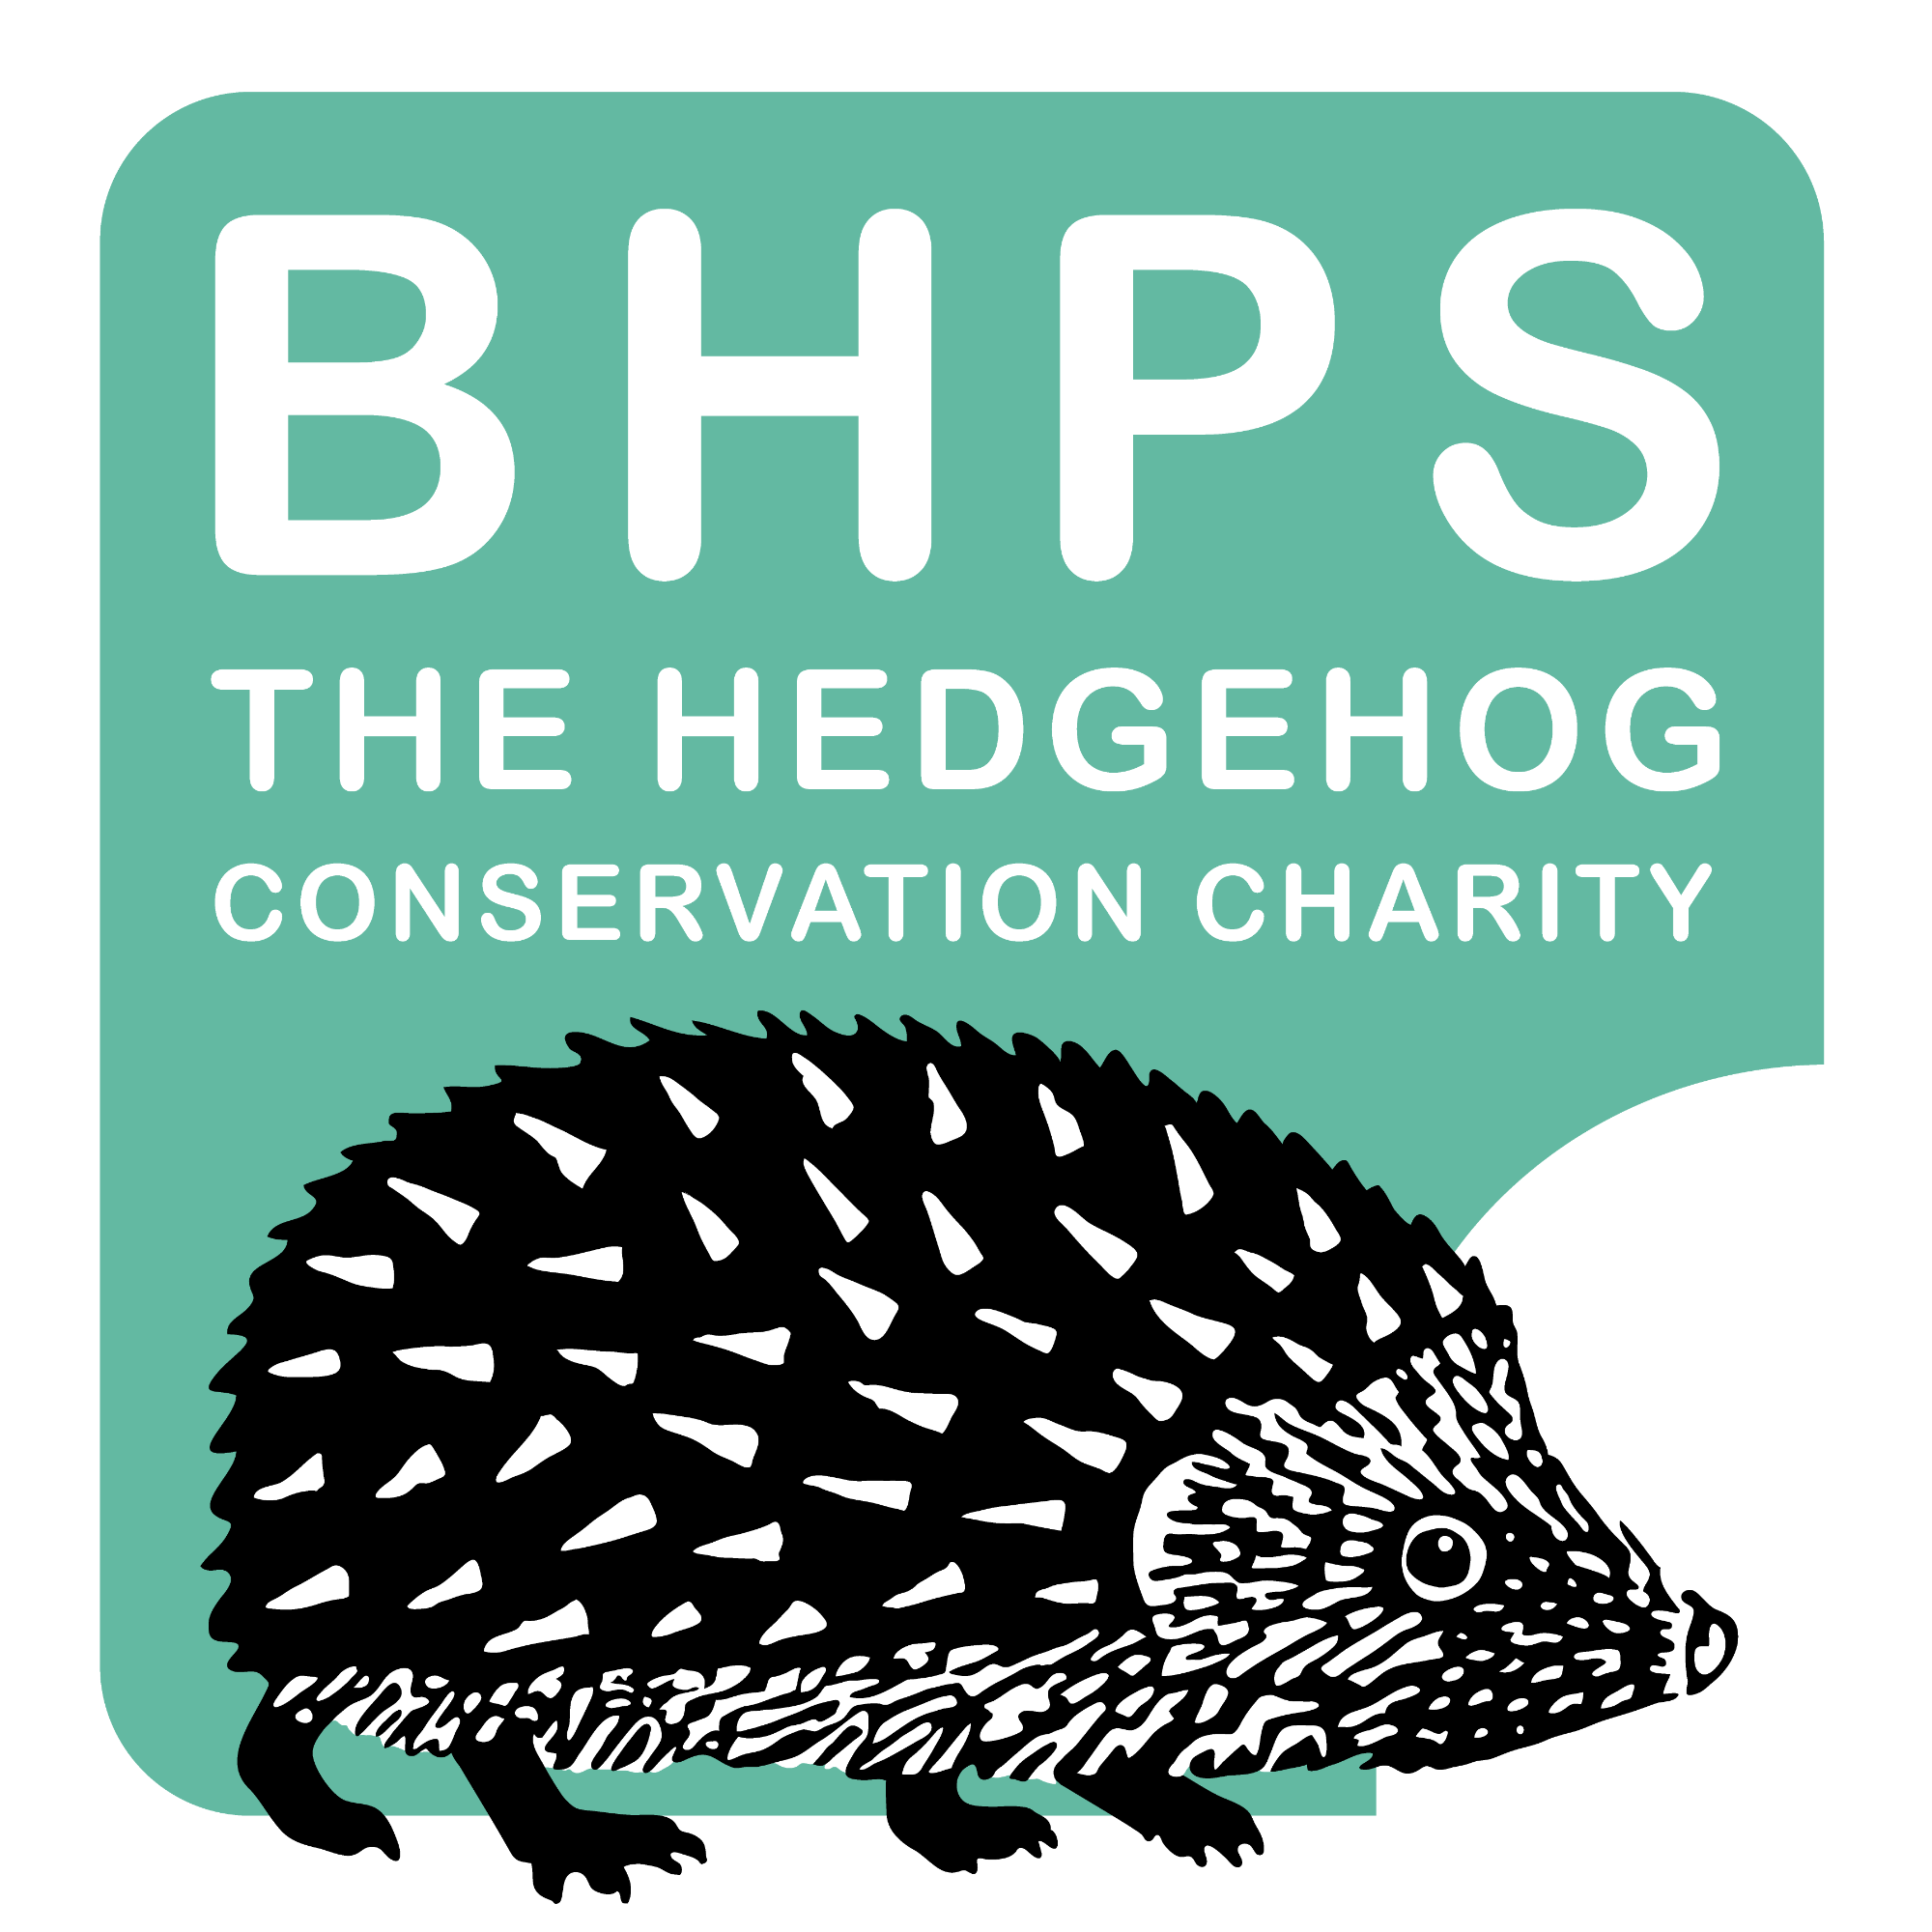 Hedgehog conservation charity